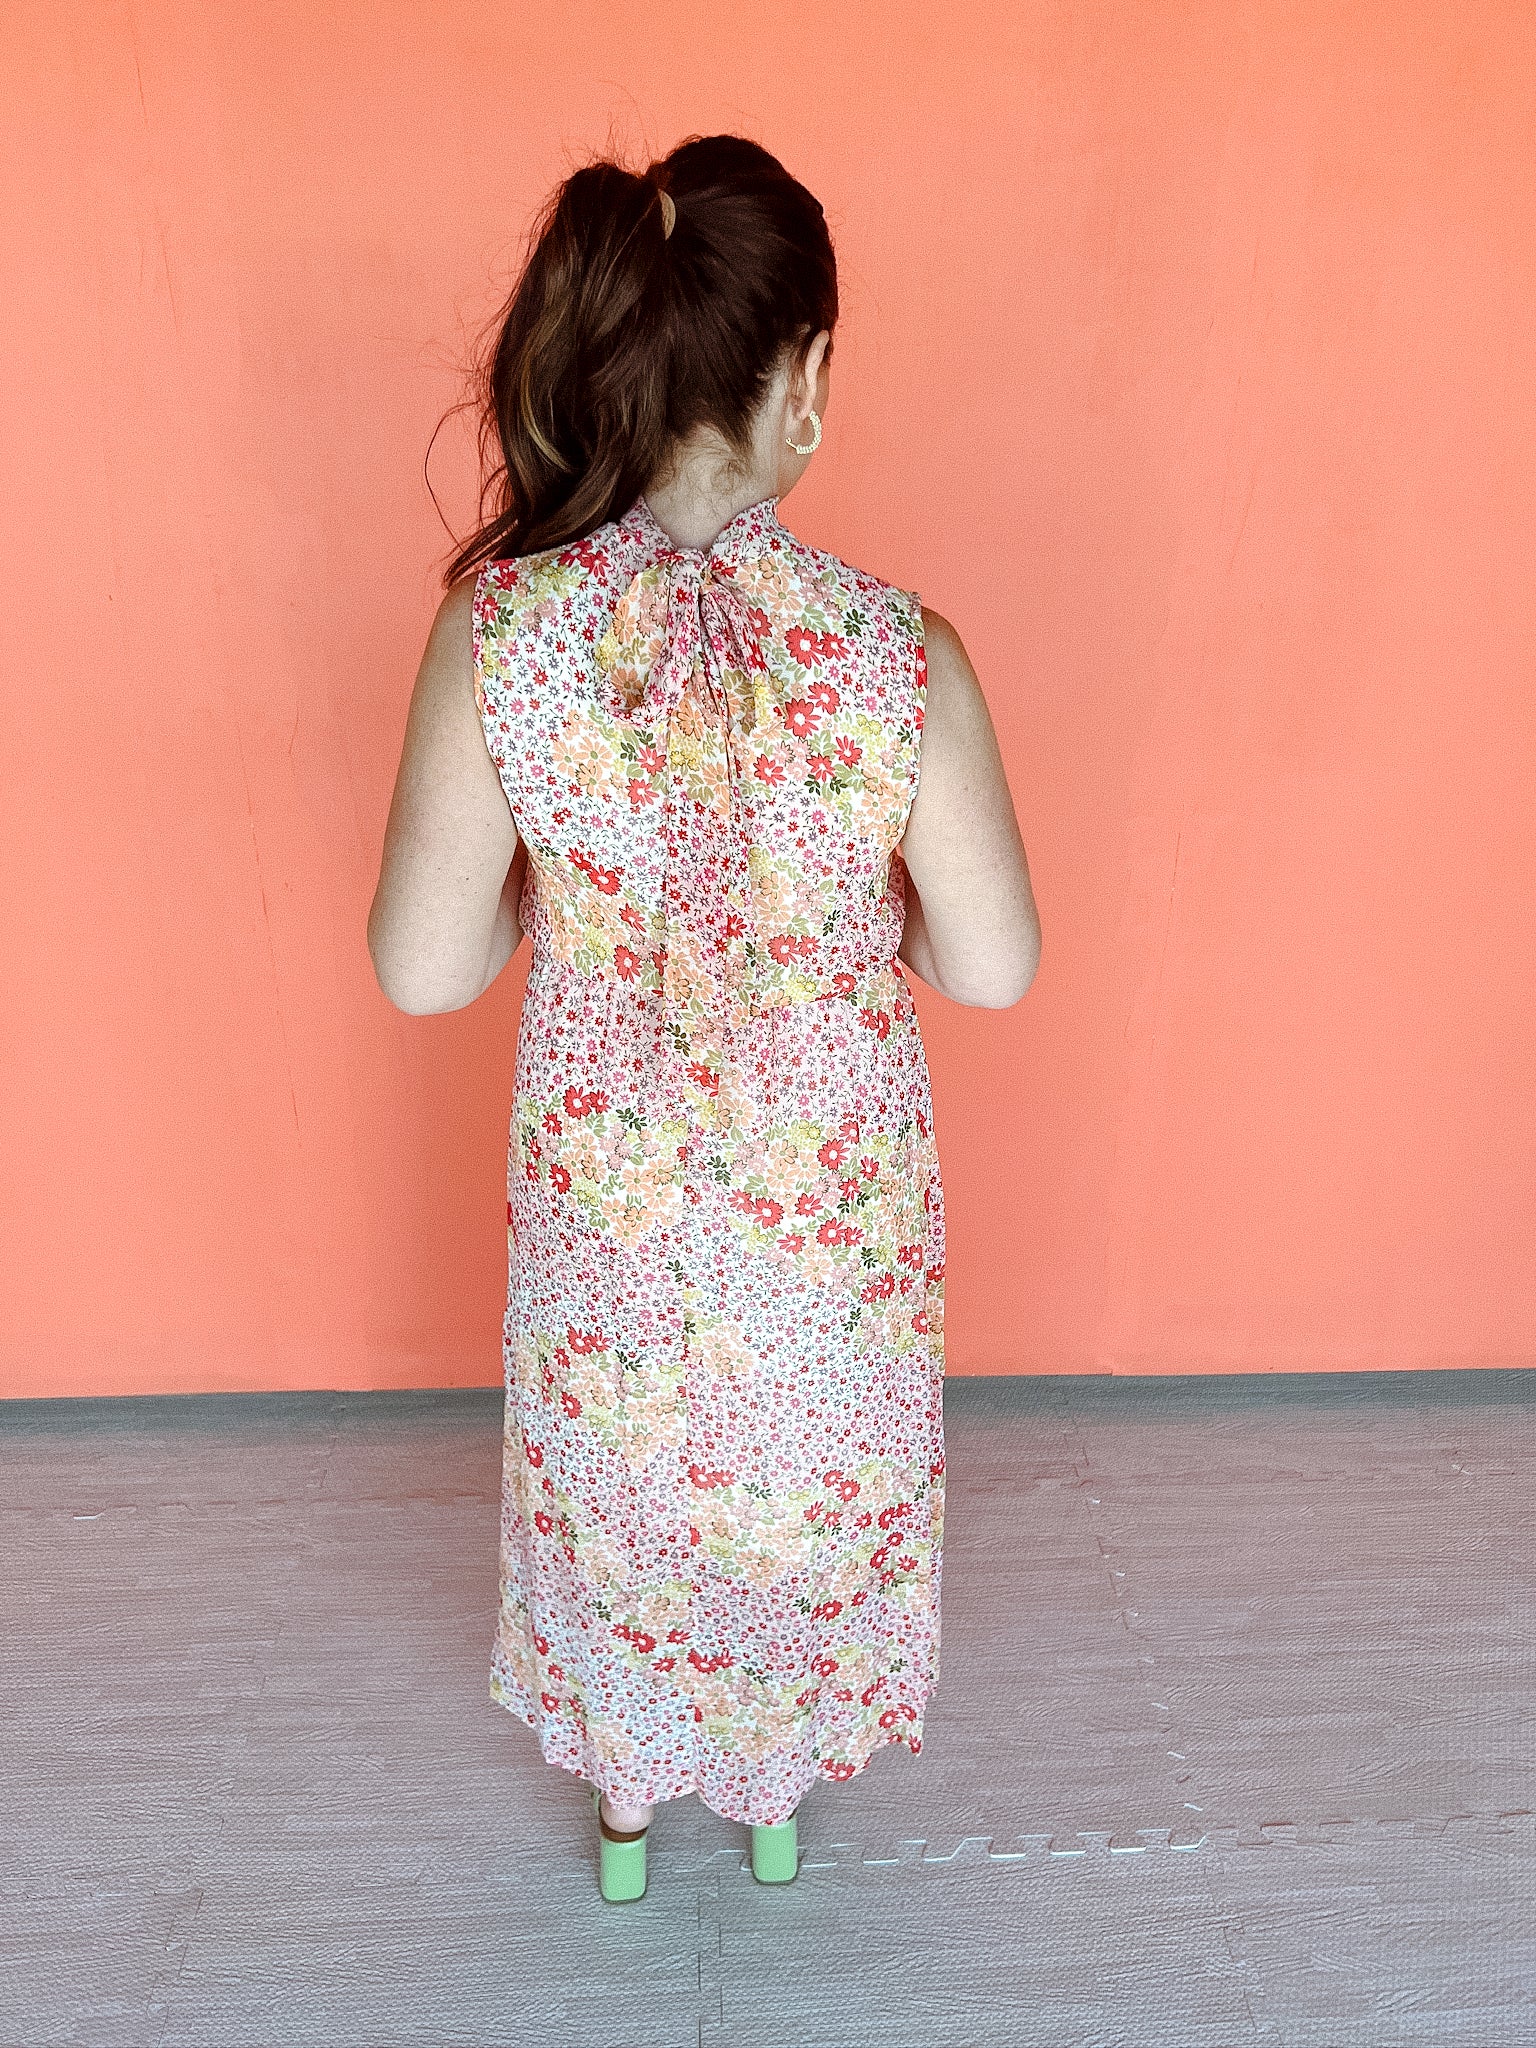 Flower Power Maxi Dress - Coral + Muted Lime + Light Olive + Dark Olive + Rosewood